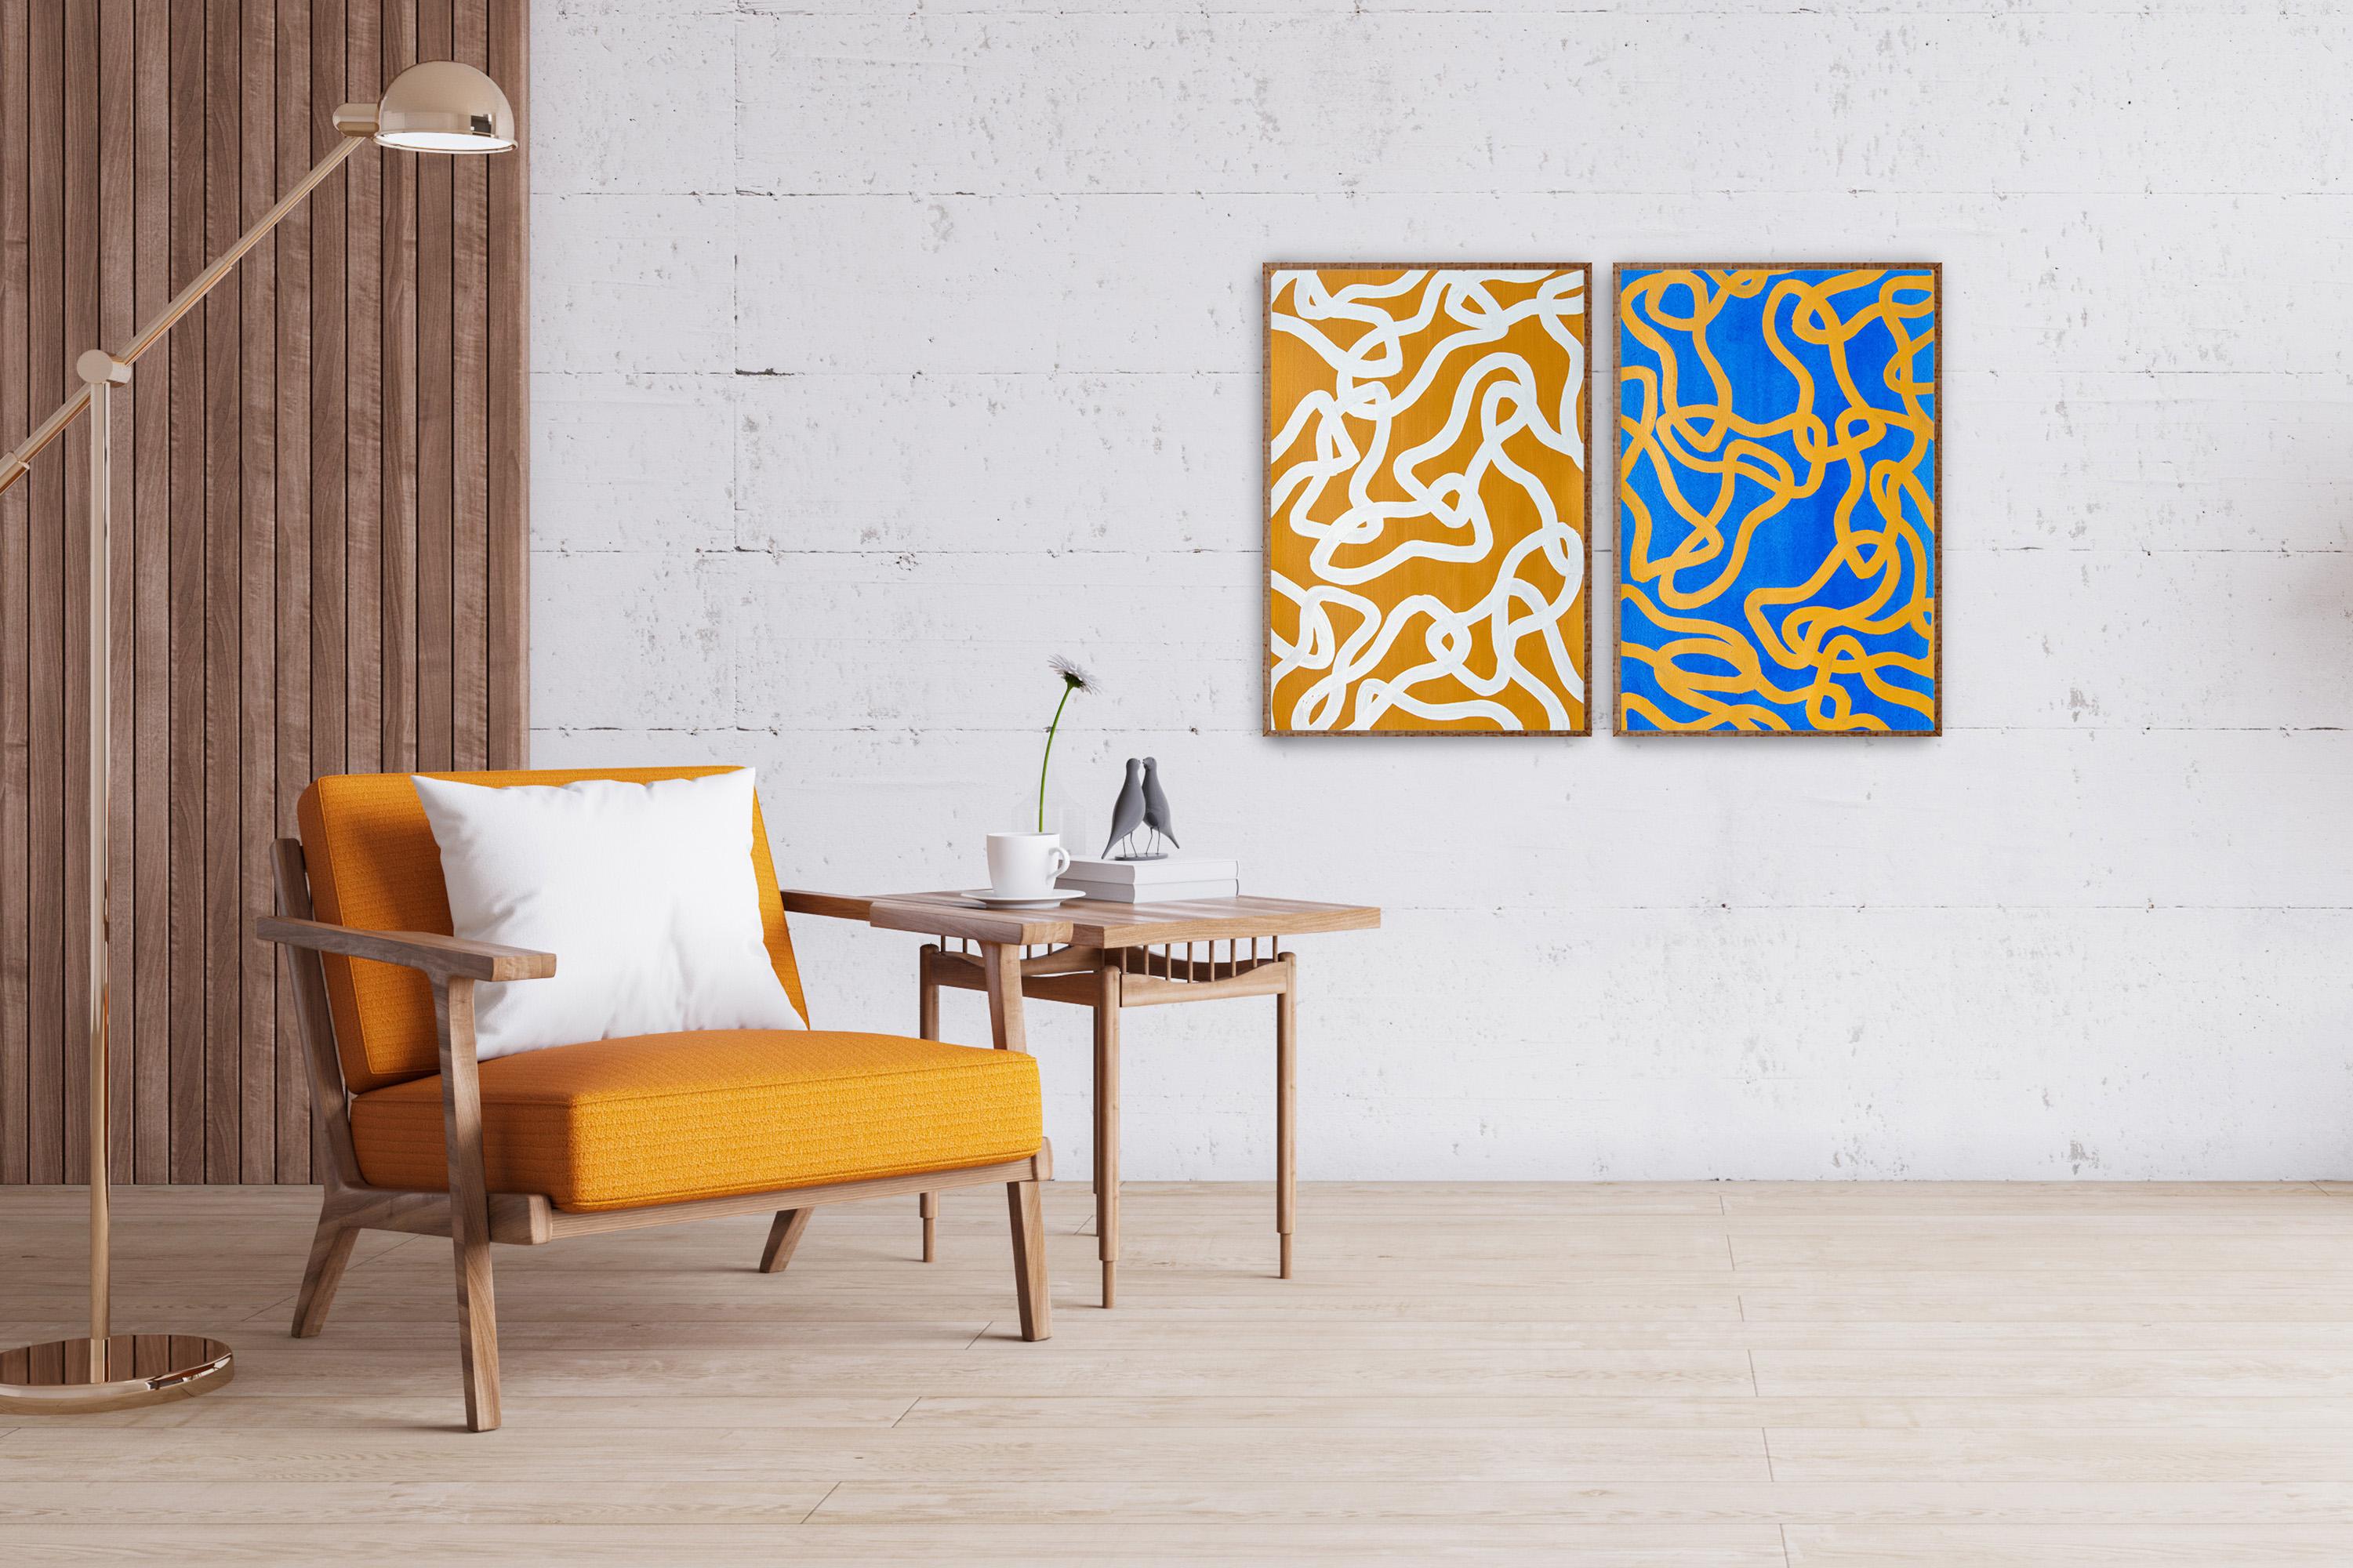 Salty N 2 & 4, Yellow, Blue Diptych, Overlapping Abstract Fishes, Mediterranean - Painting by Enric Servera